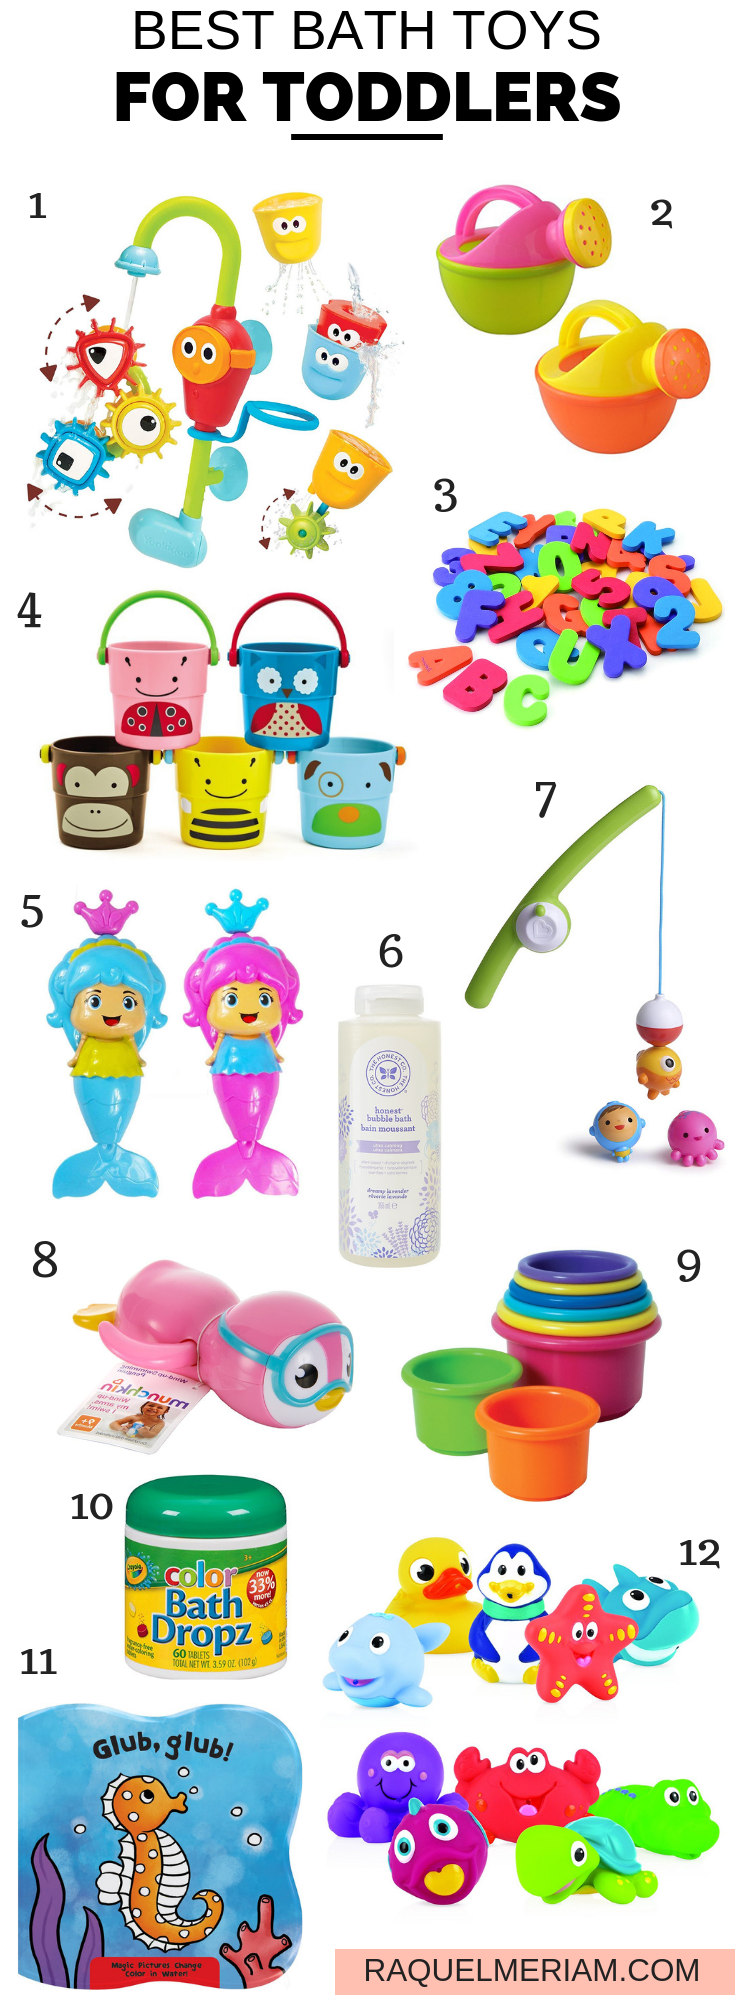 Here is a list of the Best Bath Toys for Toddlers and Kids that are affordable.